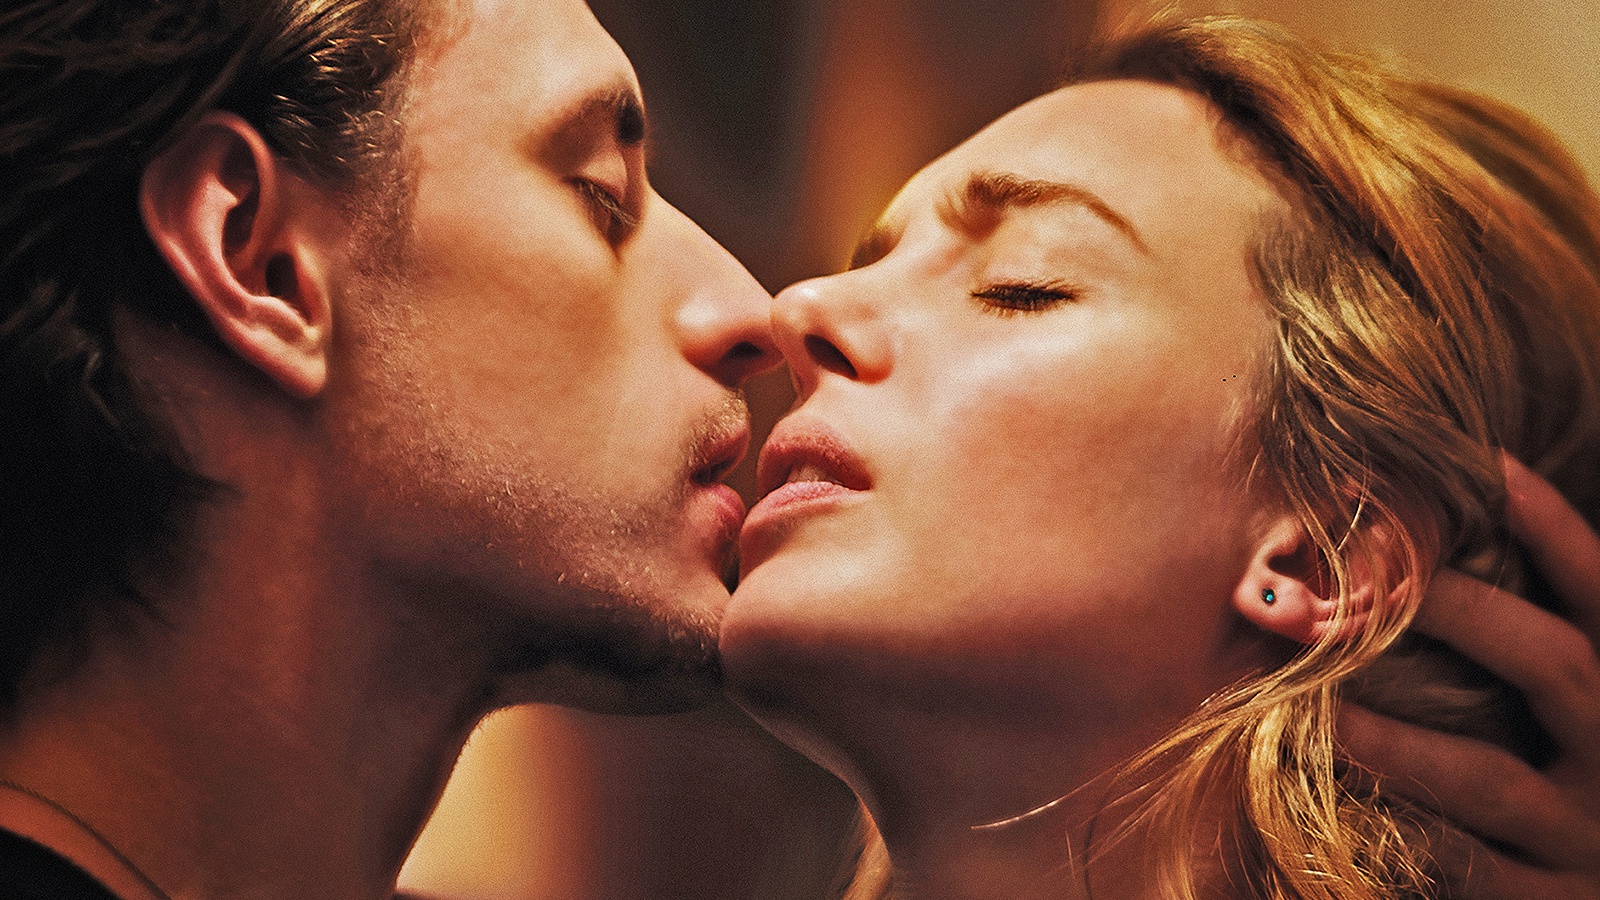 The Russian lover, the review: an author's erotica from the scandalous novel